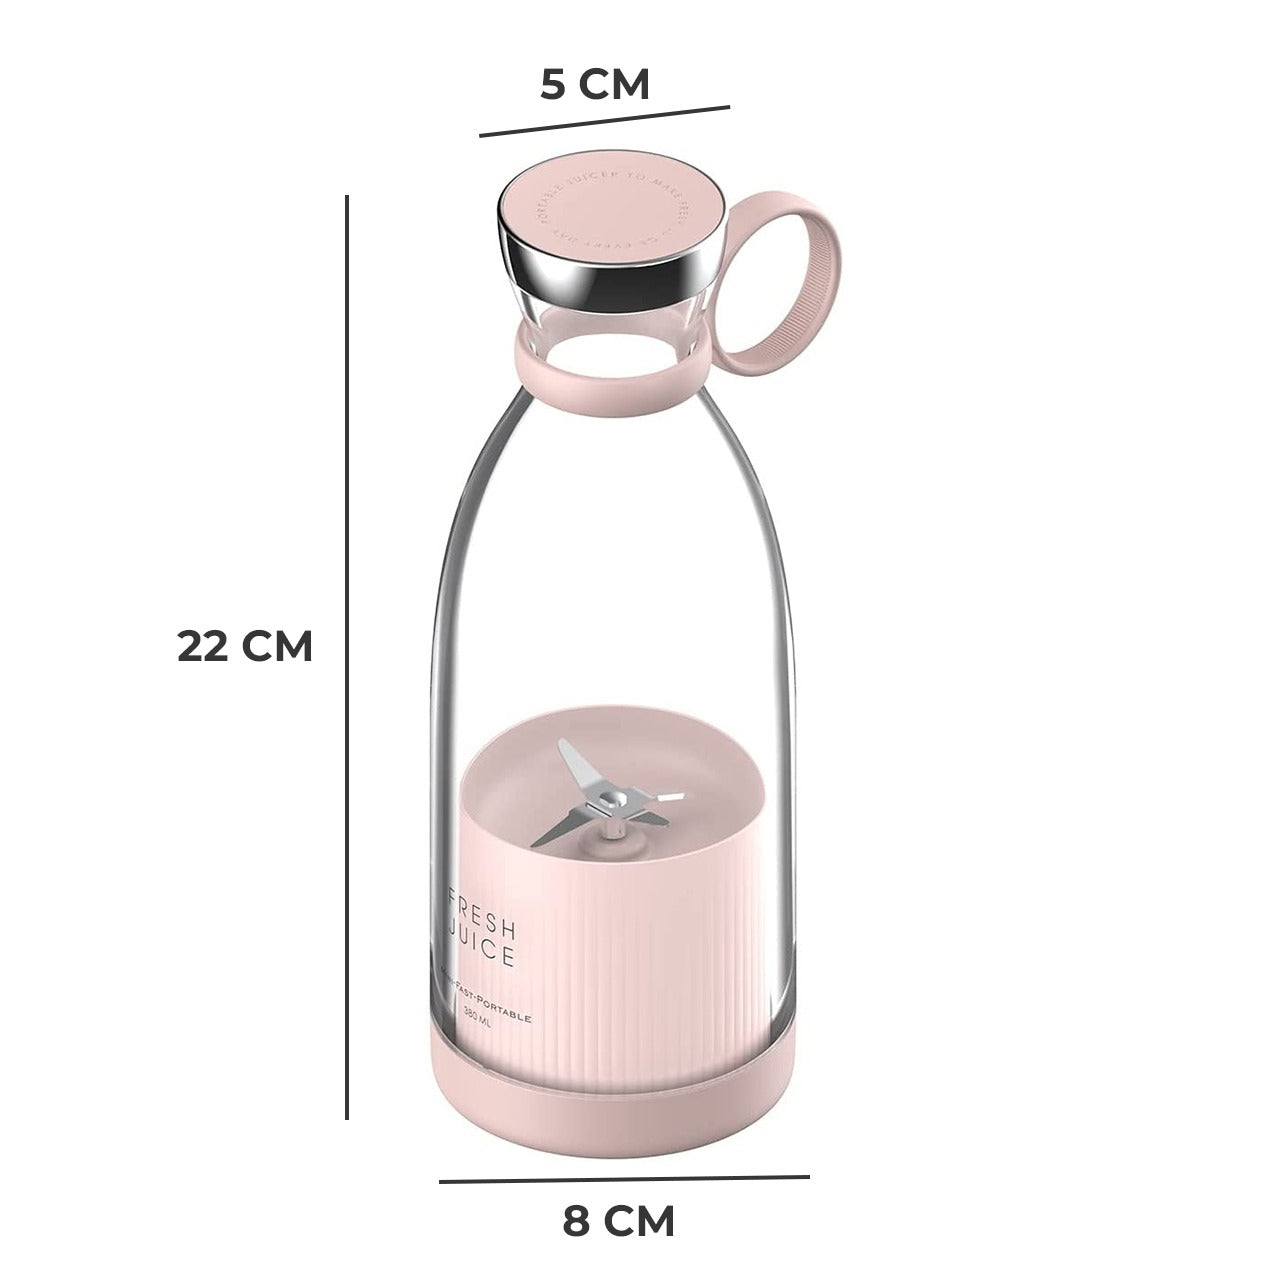 350ml Portable Instant Smoothie Juicer Blender with its size